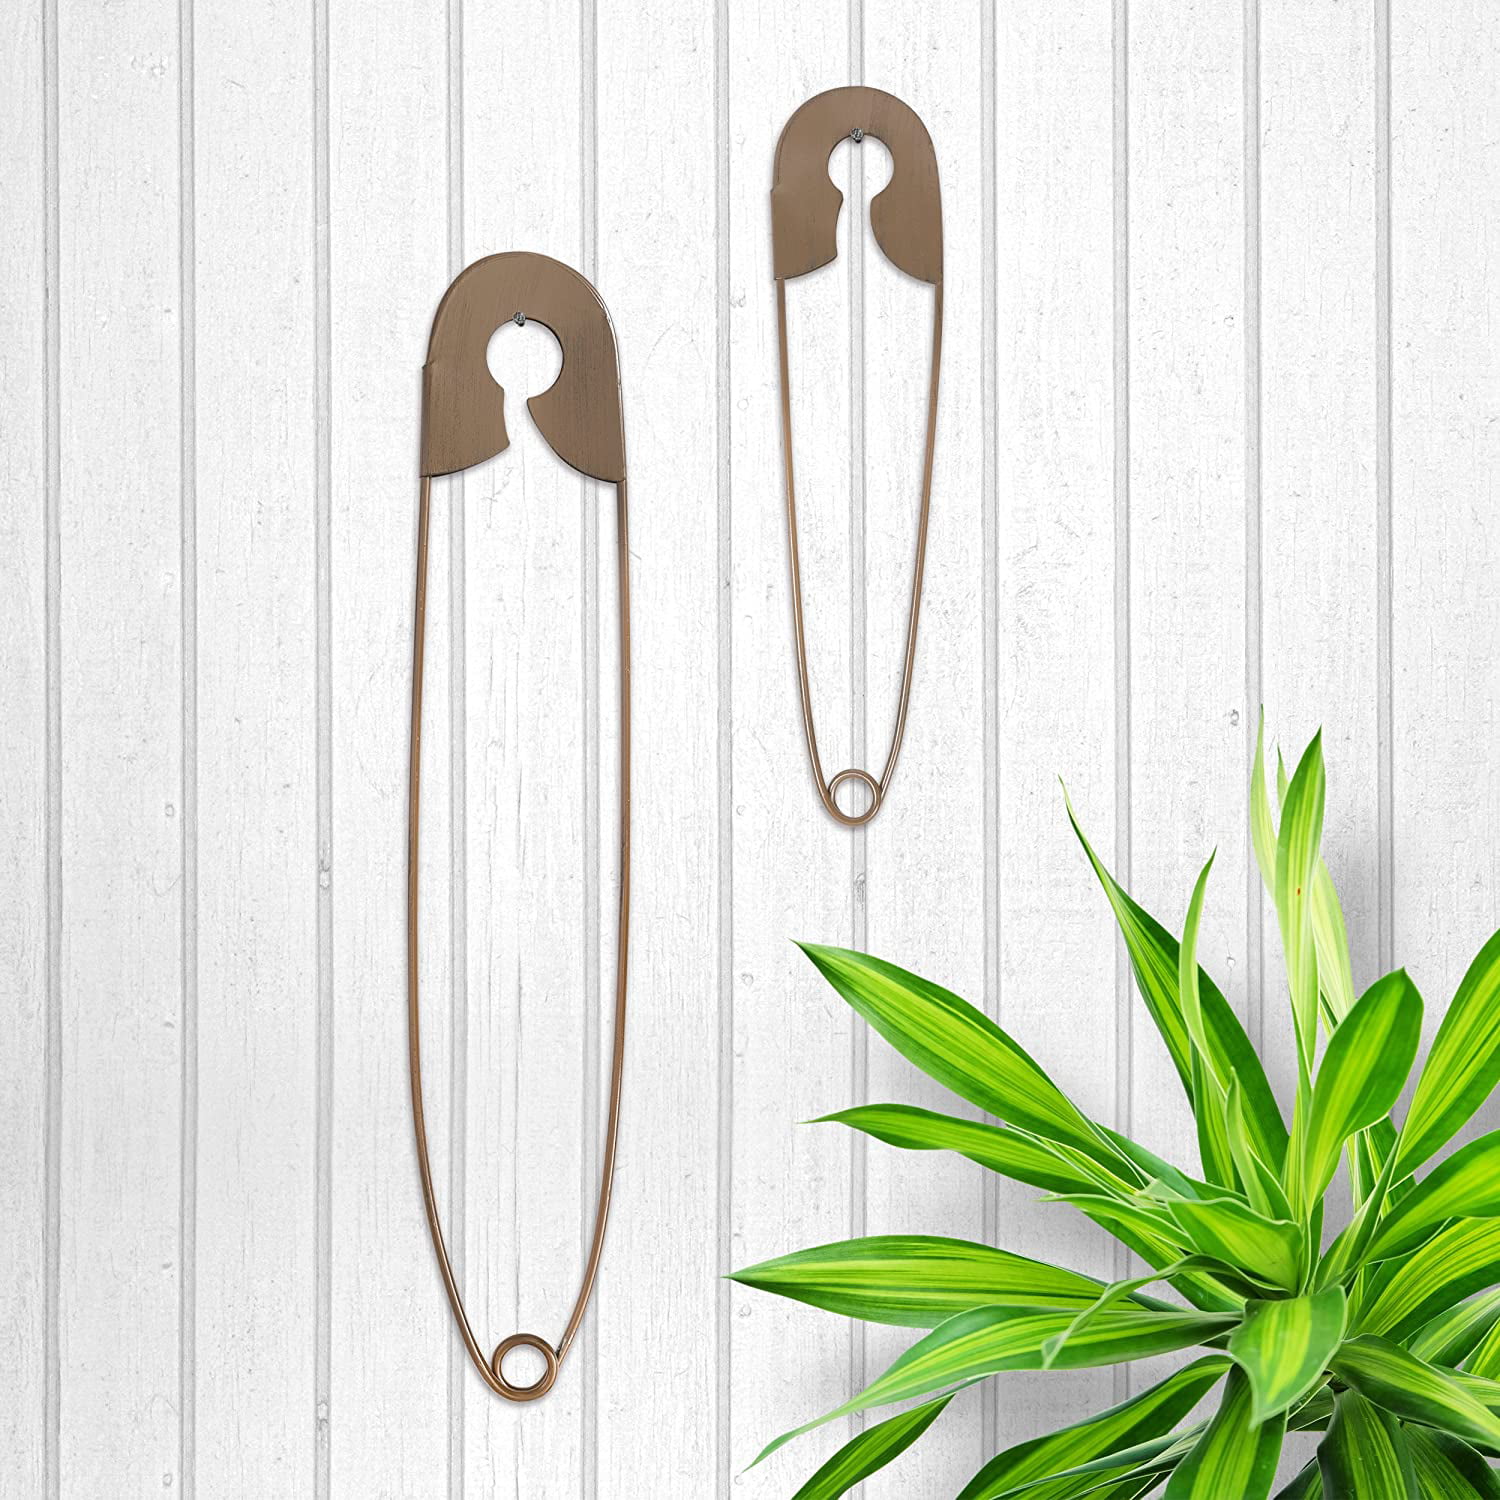 Set of 2 Large Hanging Safety Pins Rustic Color Laundry Room Wall Home Decoratio 